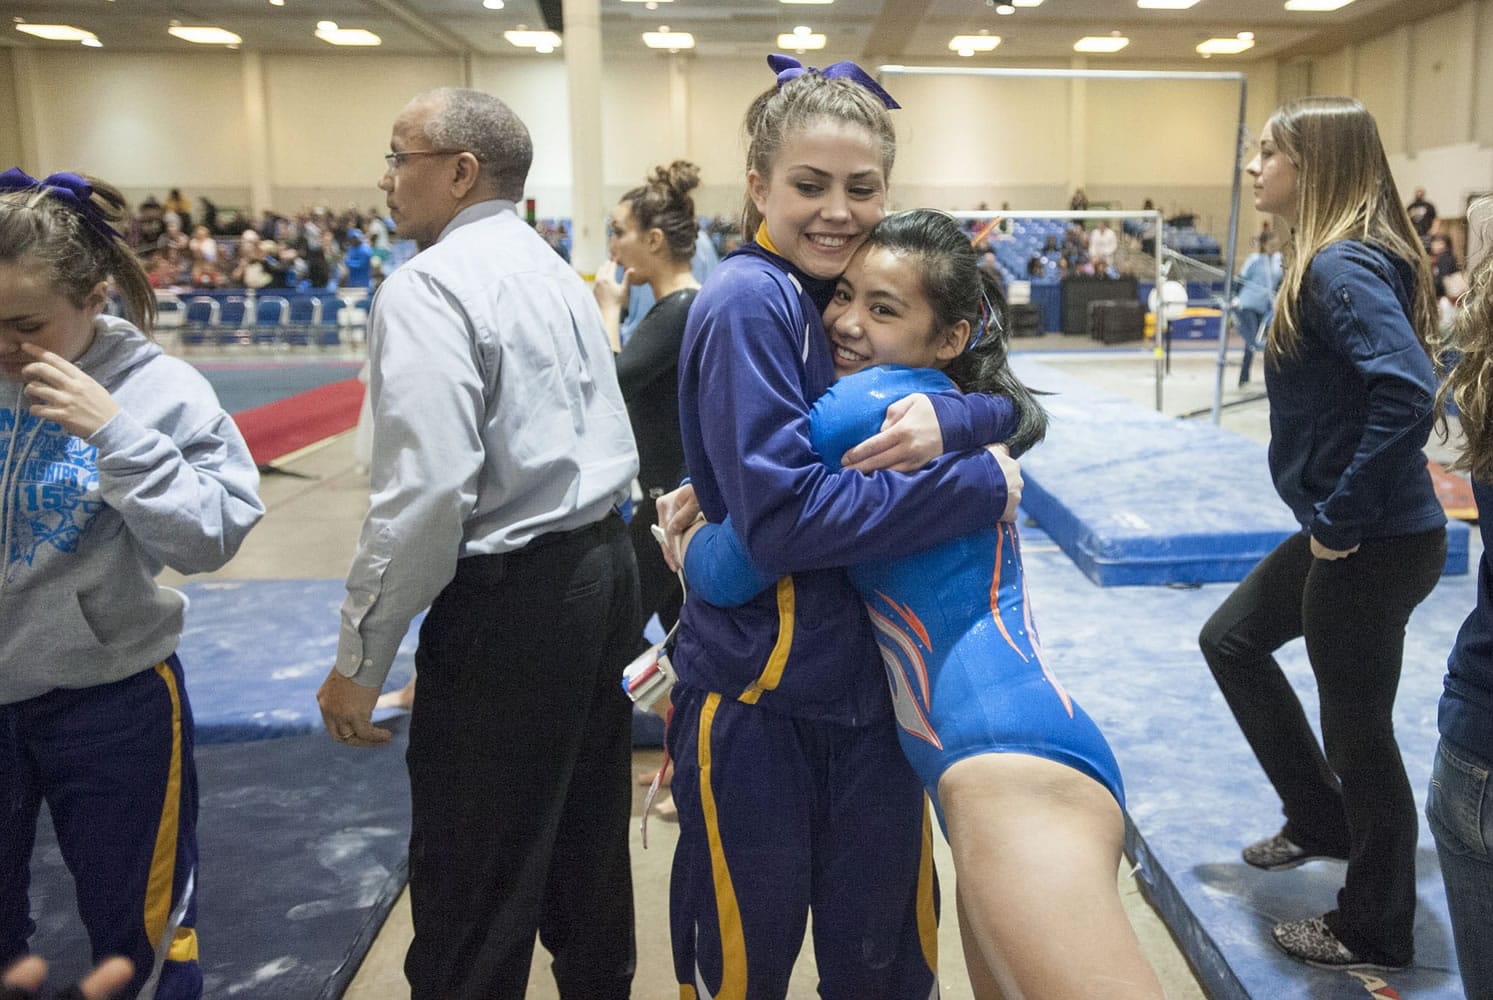 Sarah Ellis, left, of Columbia River High School congratulates Kylee Tjensvold of Ridgefield after her performance of the uneven bars at the 3A/2A gymnastic state championships in Tacoma on Saturday, Feb.